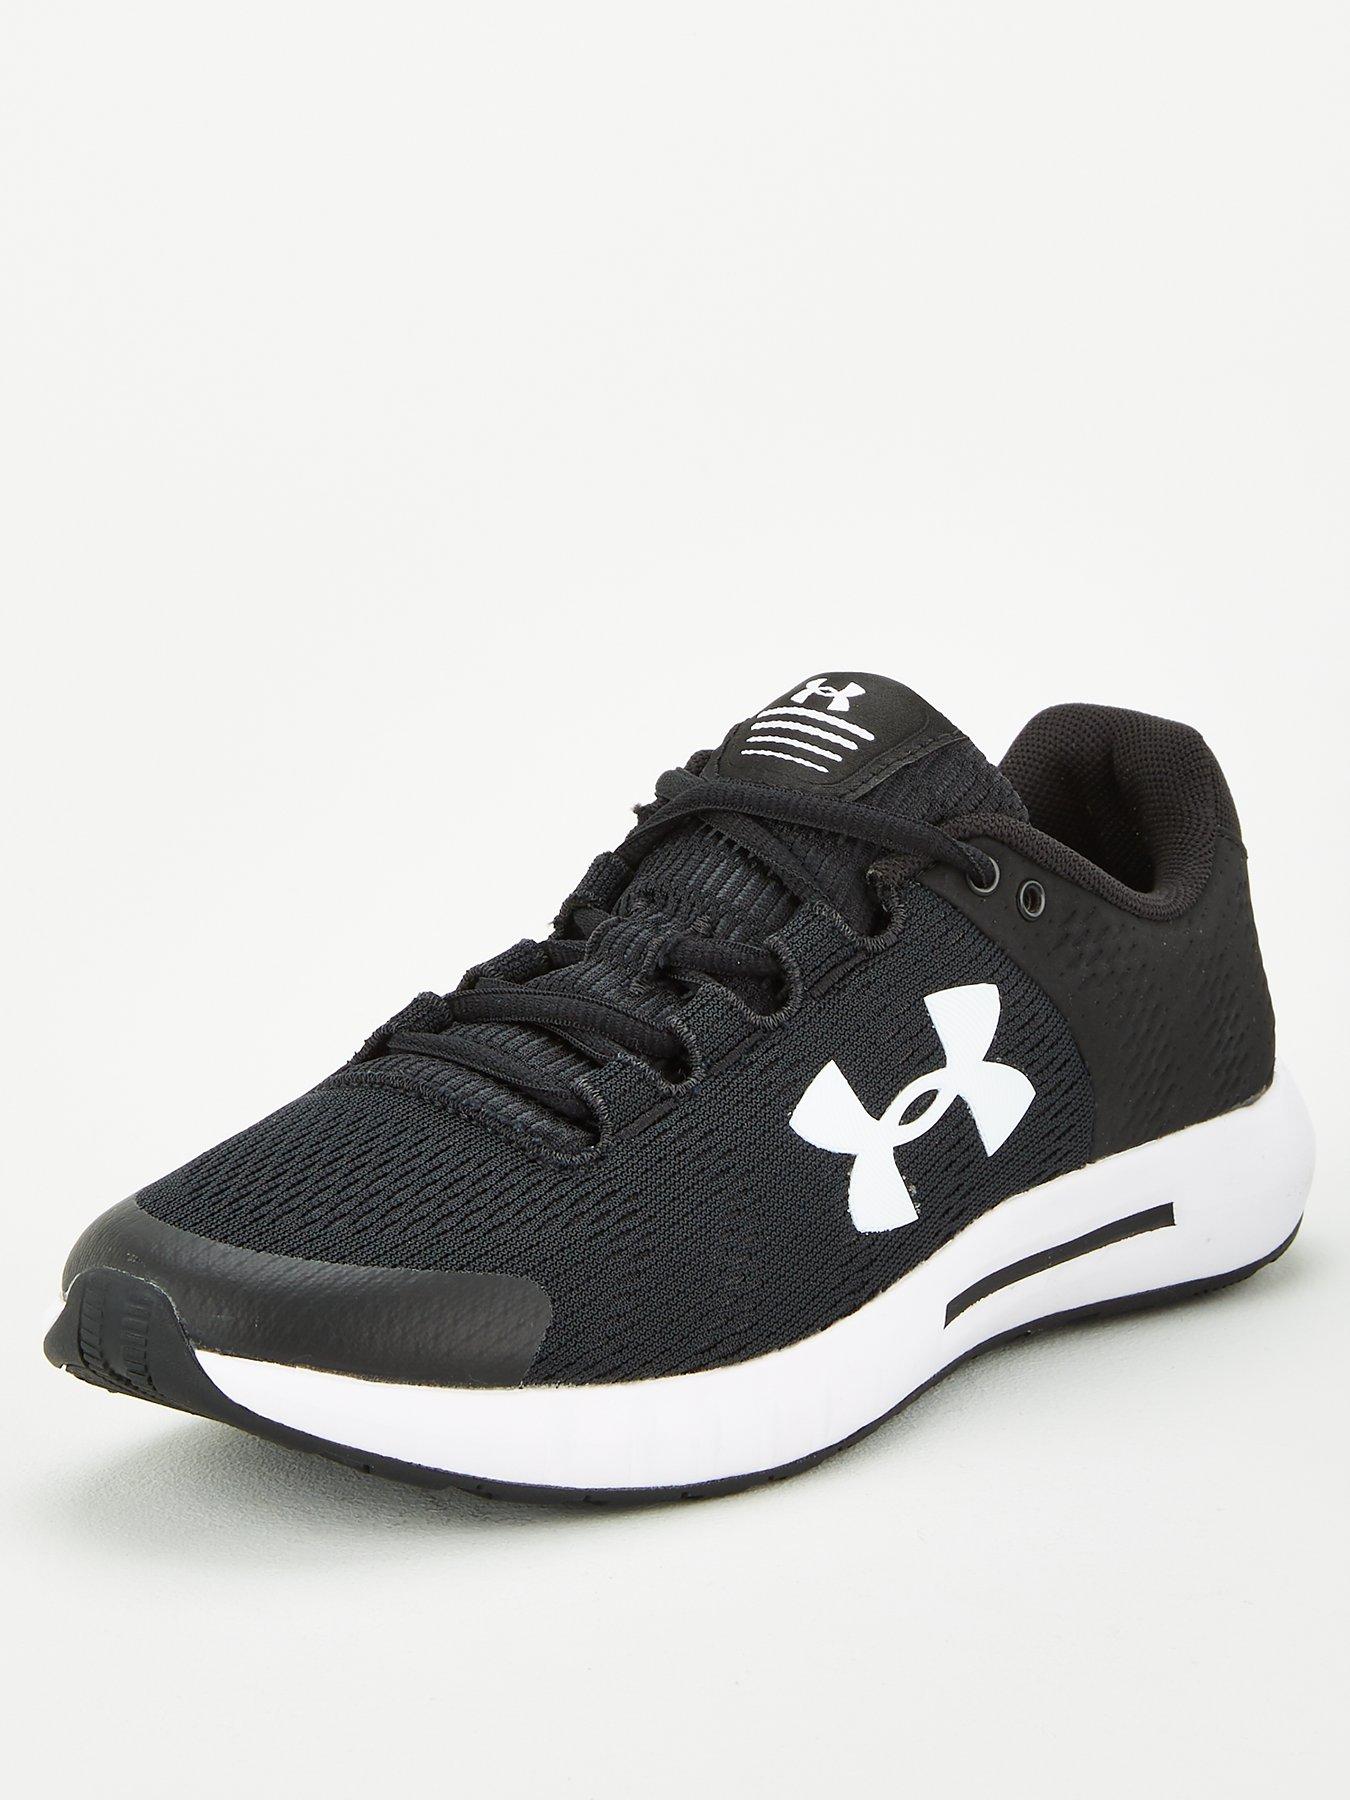 under armour women's trainers